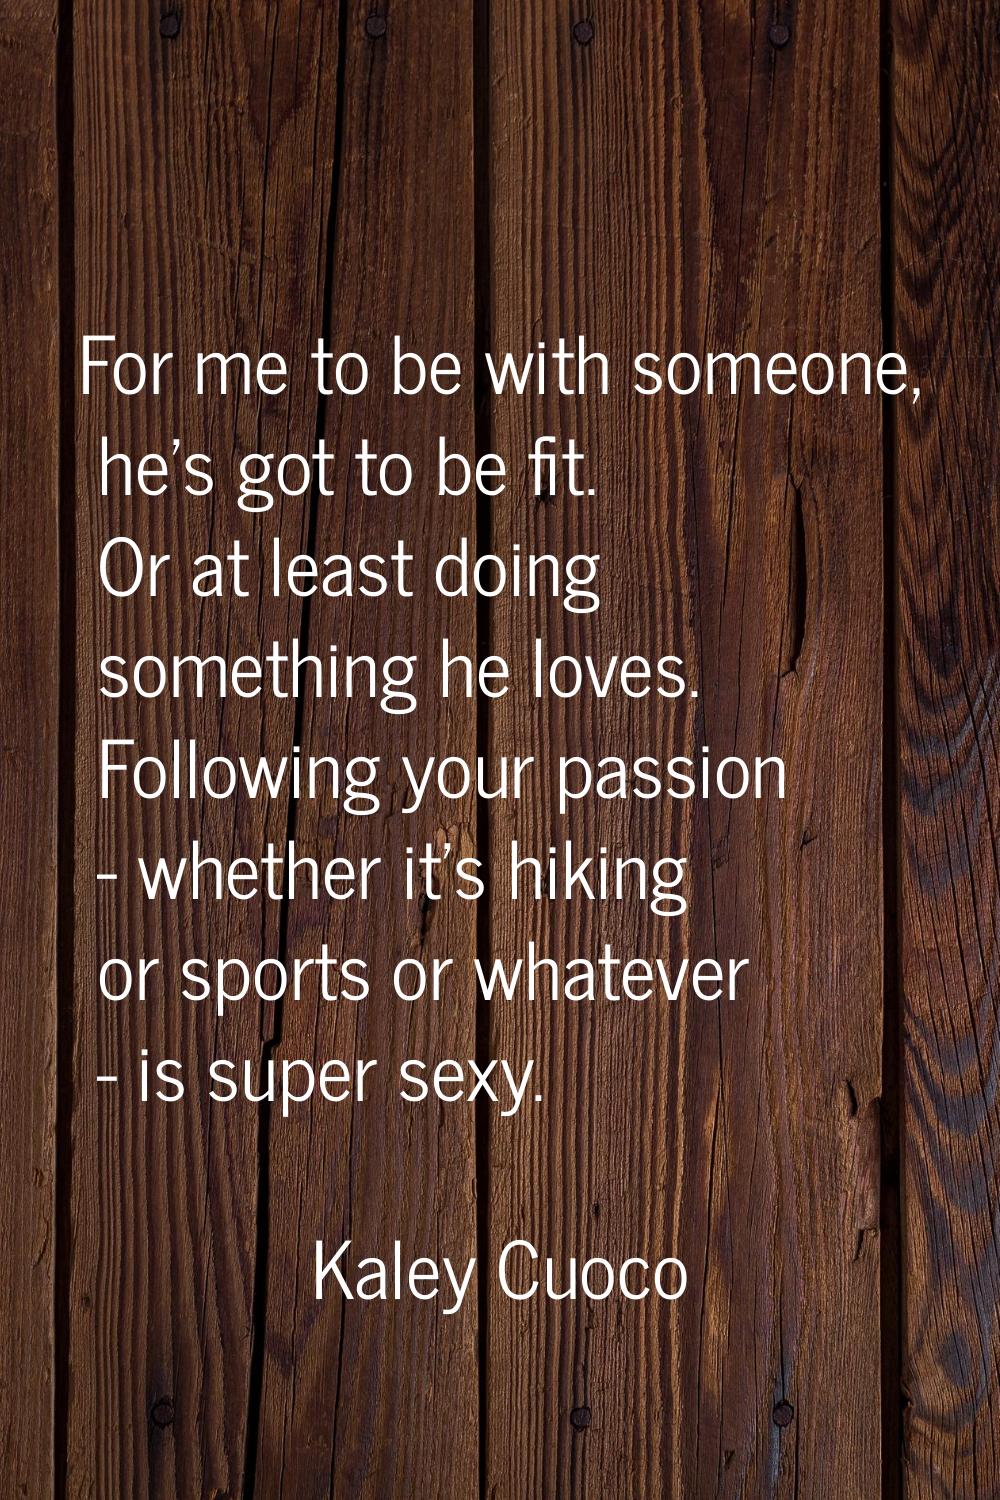 For me to be with someone, he's got to be fit. Or at least doing something he loves. Following your